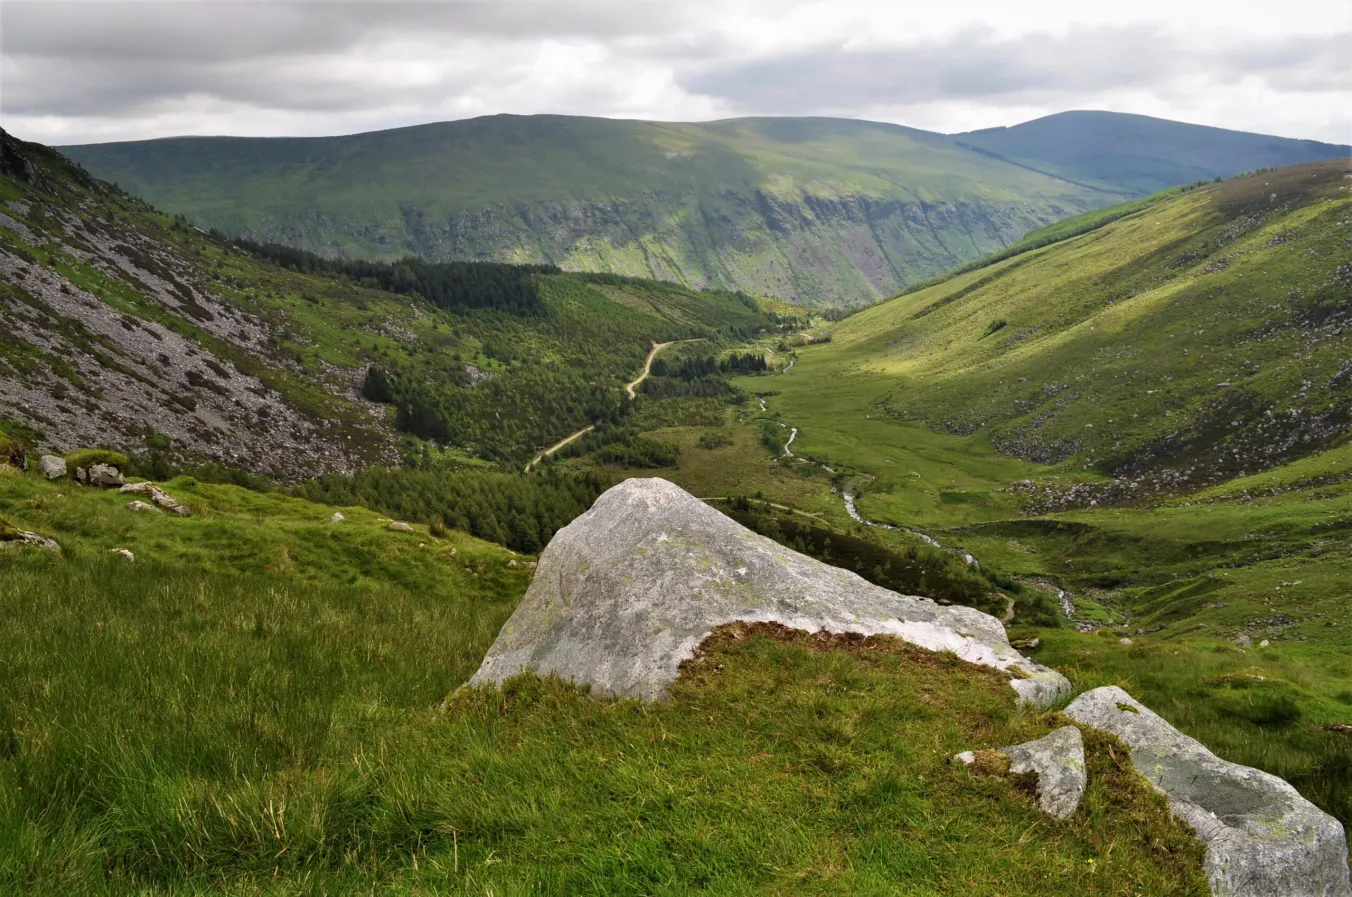 The view down Fraughan Rock Glen into the Glenmalure Valley